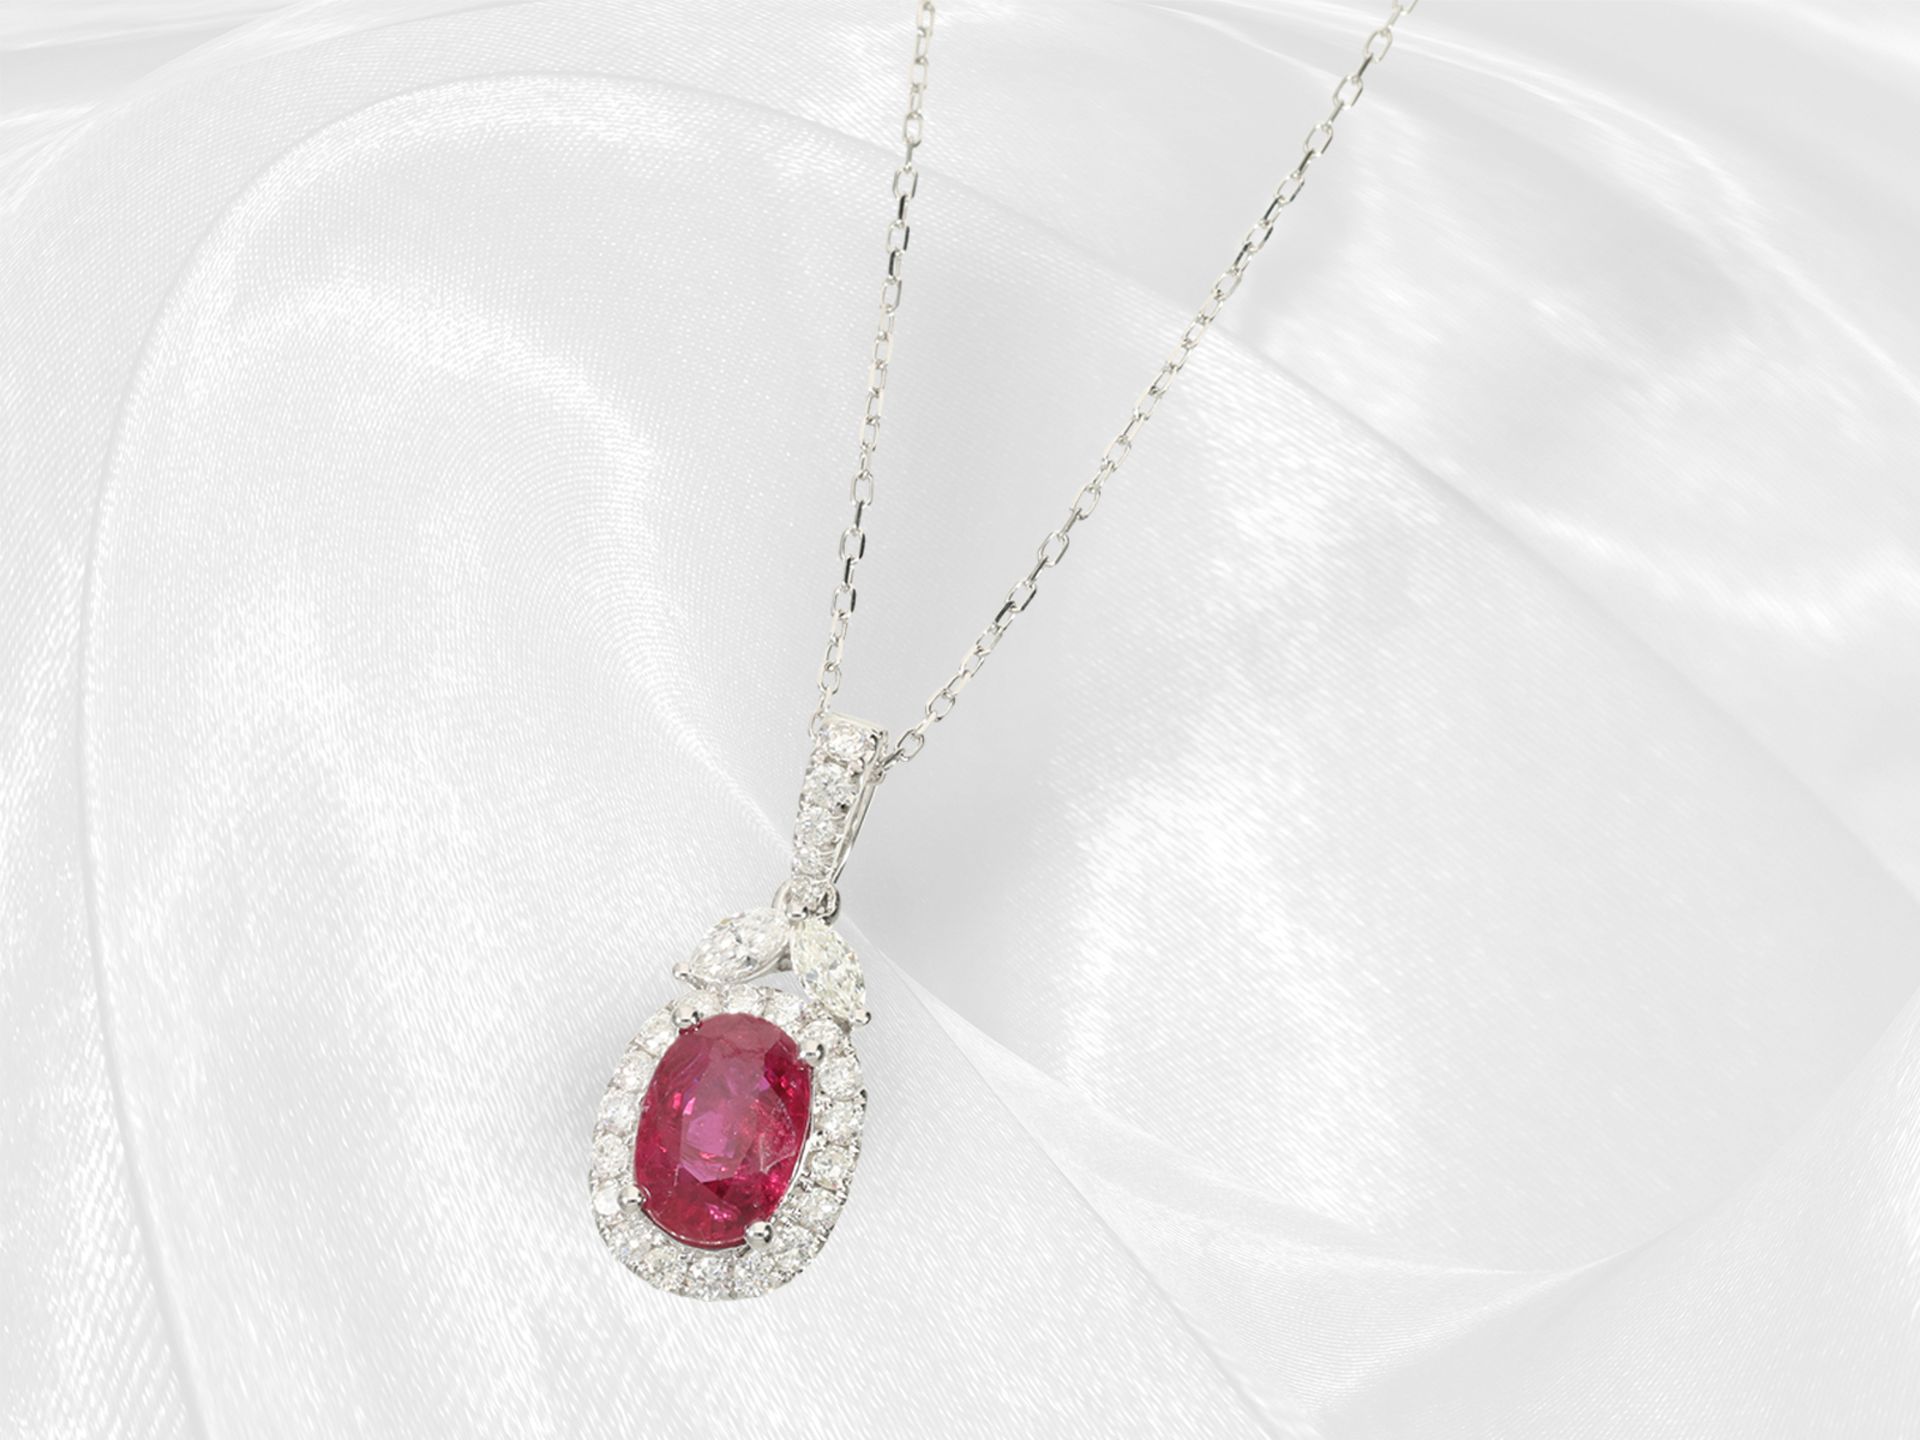 Necklace/pendant: valuable, like new ruby/brilliant jewellery